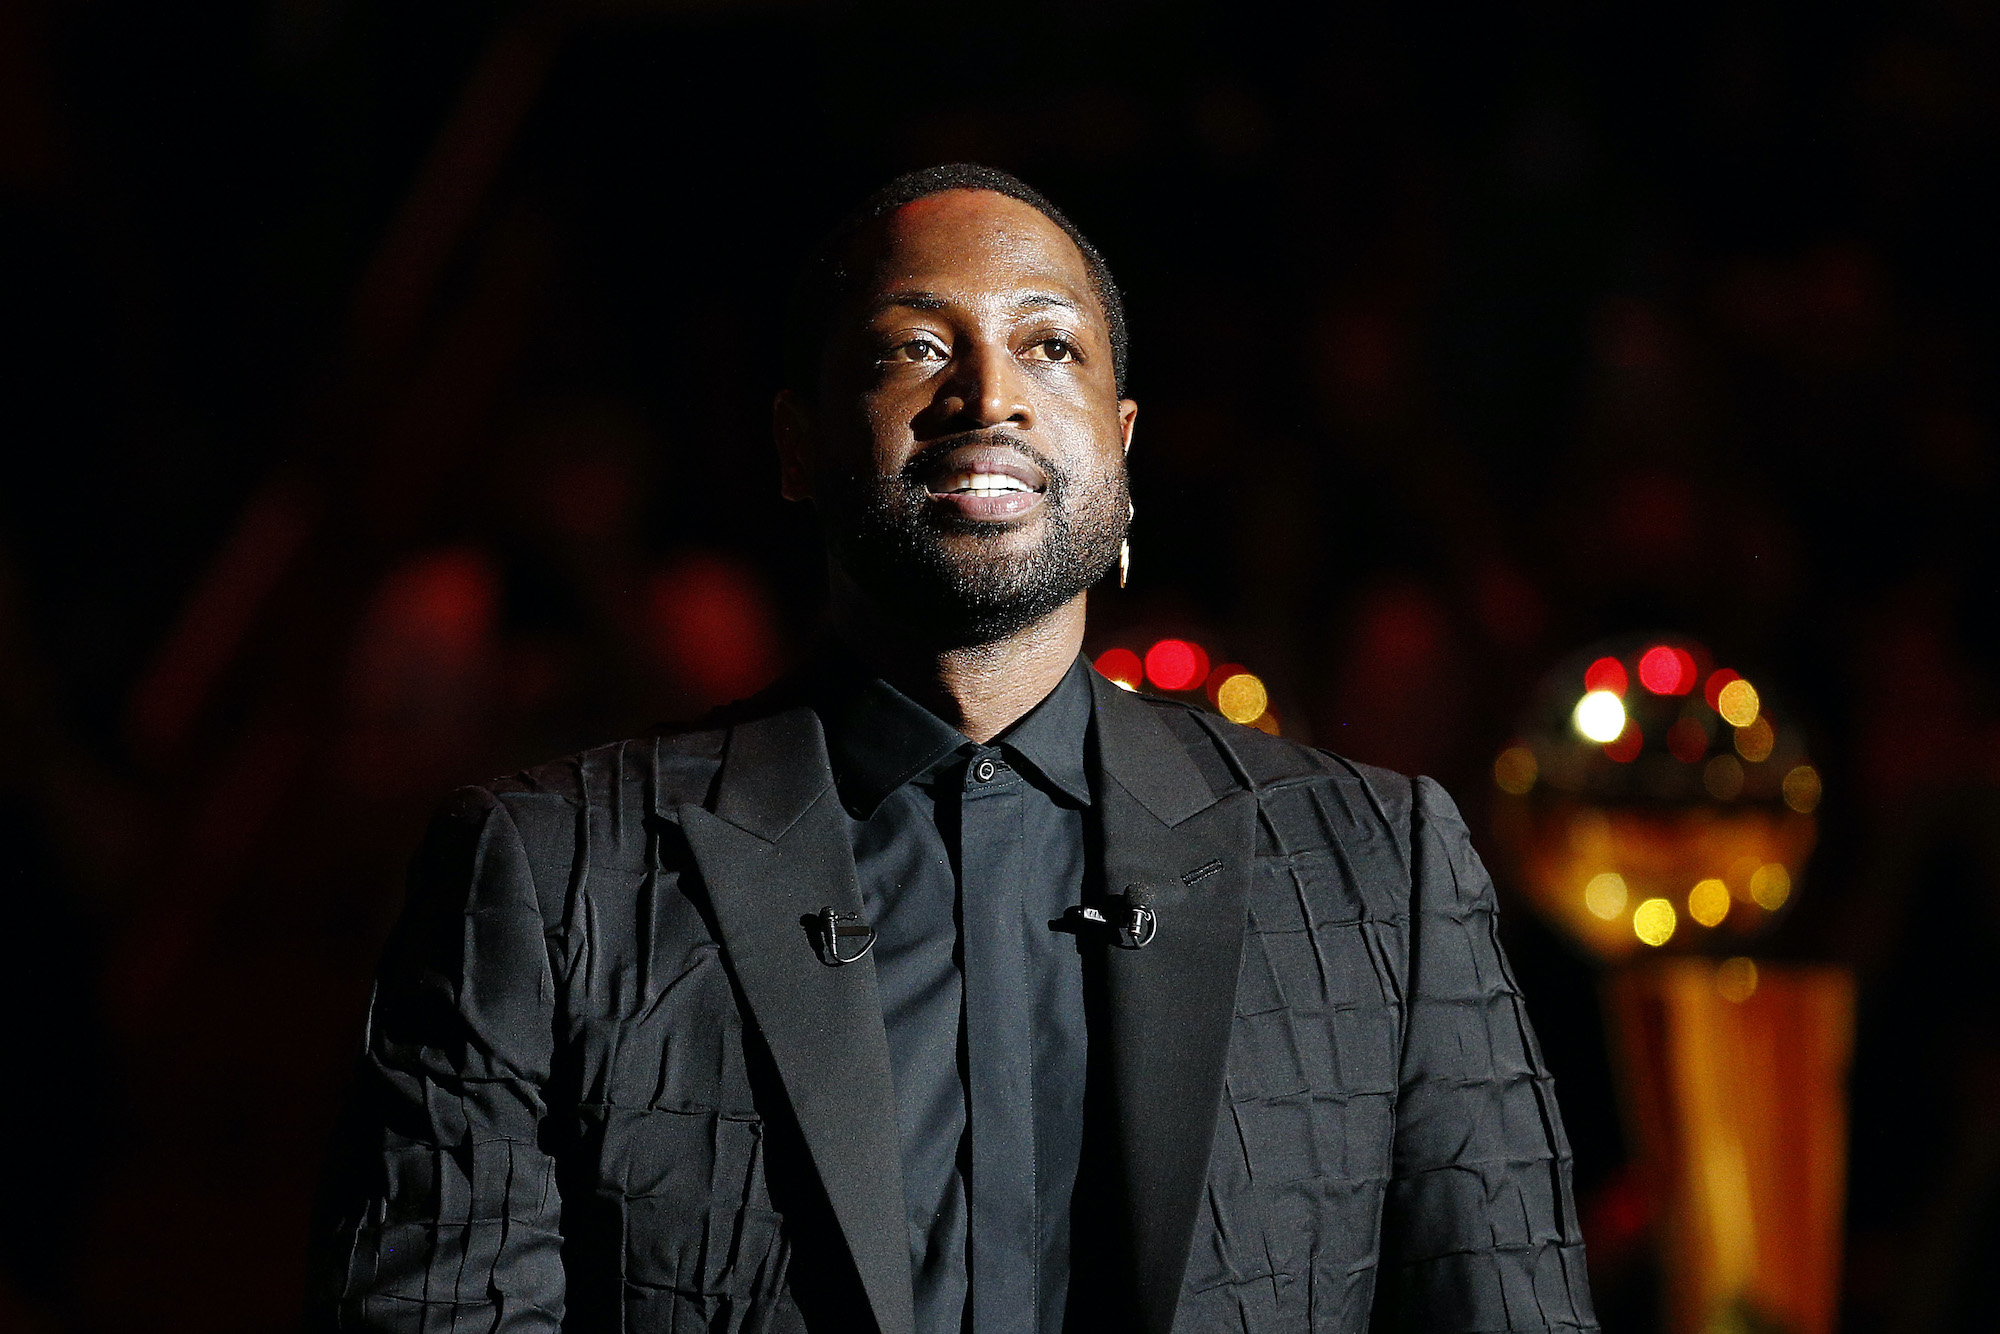 Dwyane Wade Says He Prepares for ‘The Cube’ Just Like He Prepared for NBA Games With the Miami Heat